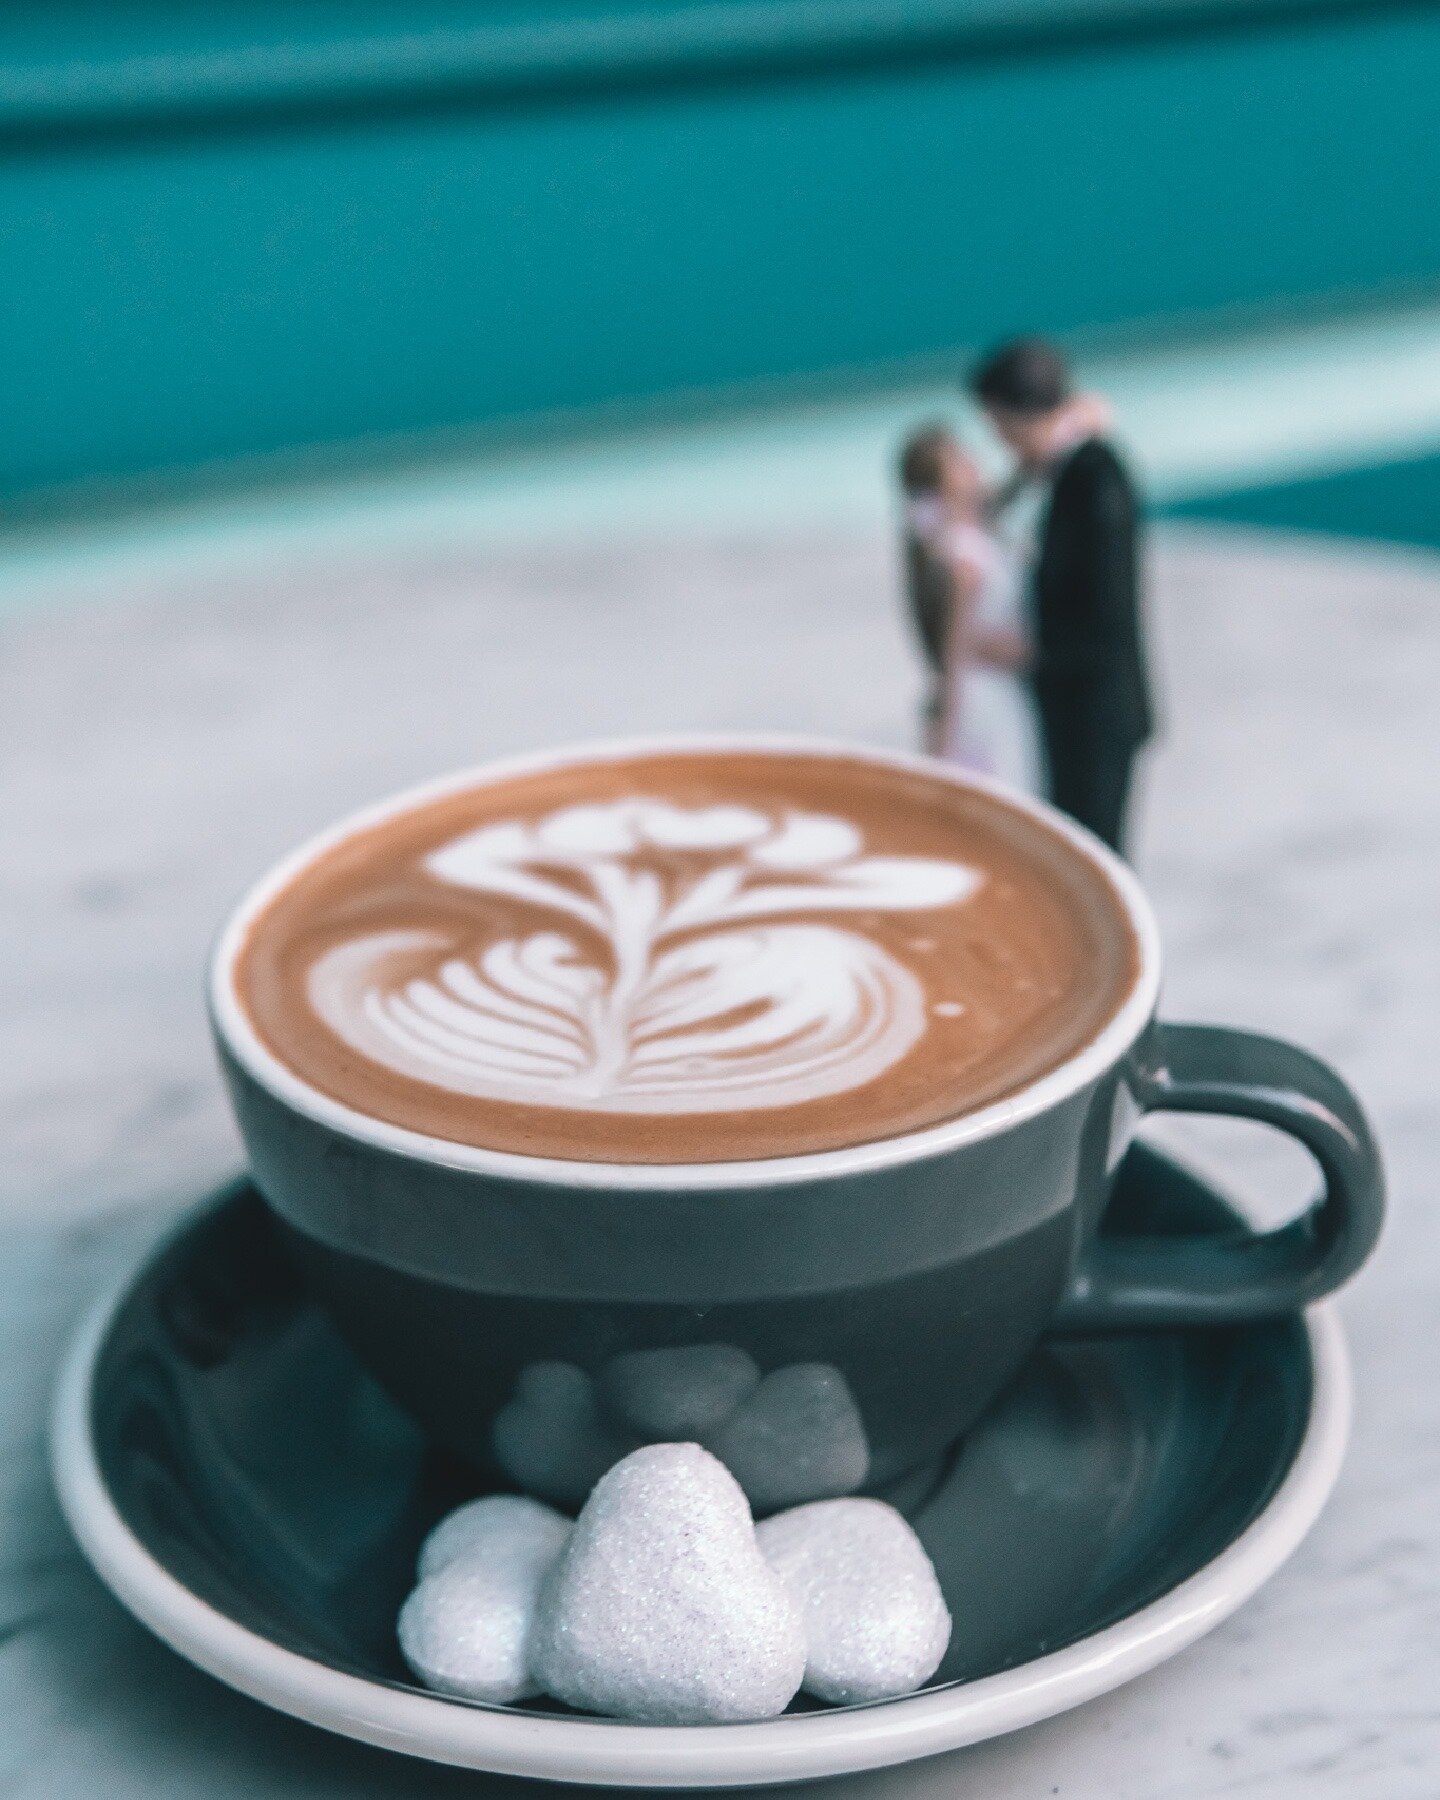 Only a few more days to enjoy our February lattes! Don't &quot;sip&quot; out. Try our Wedding Cake Latte made it Vanilla, Hazelnut, and Coconut. Link in bio to learn more.